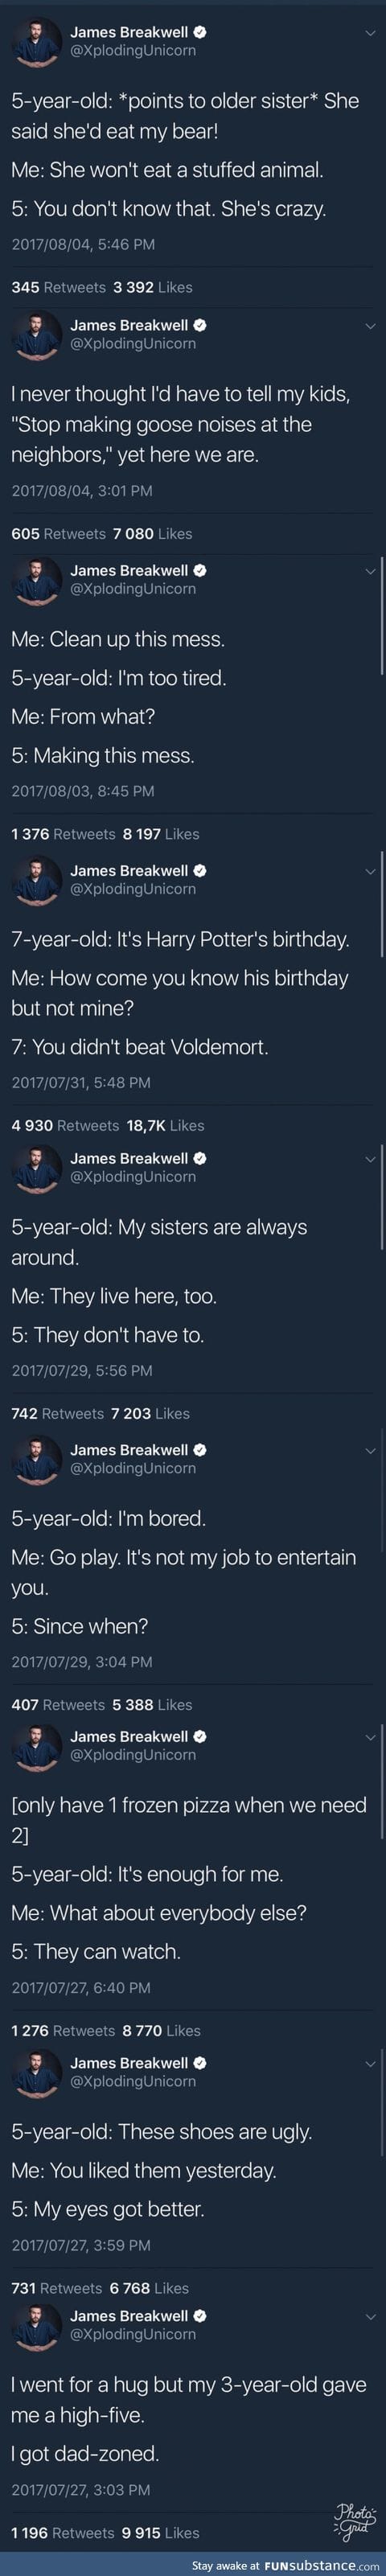 Just a guy on twitter who posts things his 4 kids say